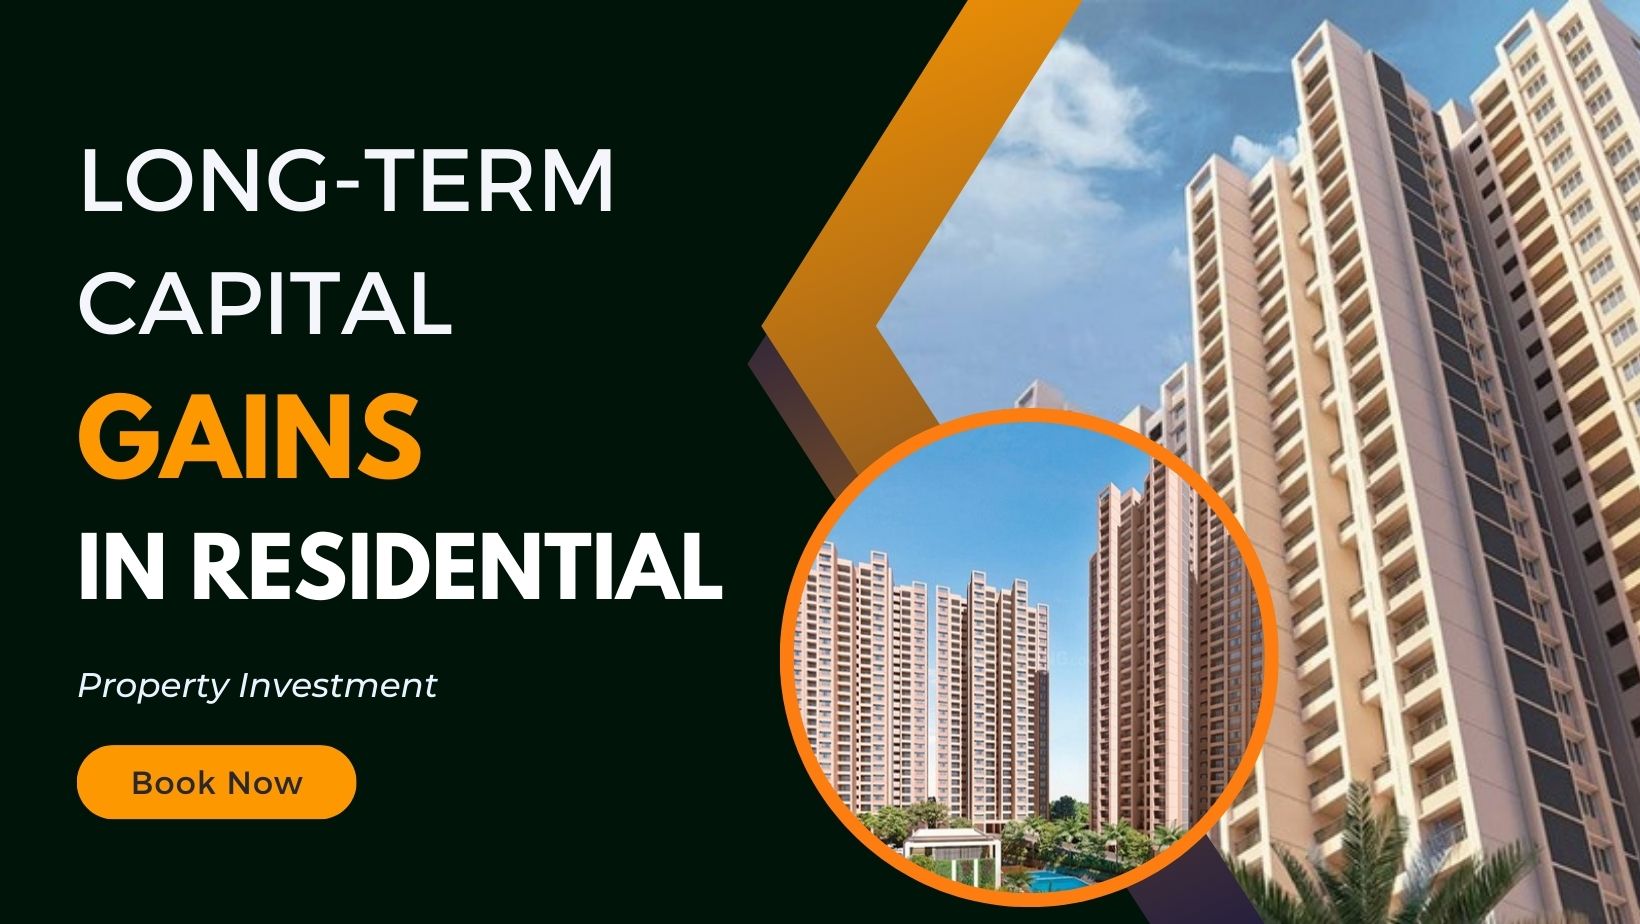 Long-term capital gains in Residential Property Investment